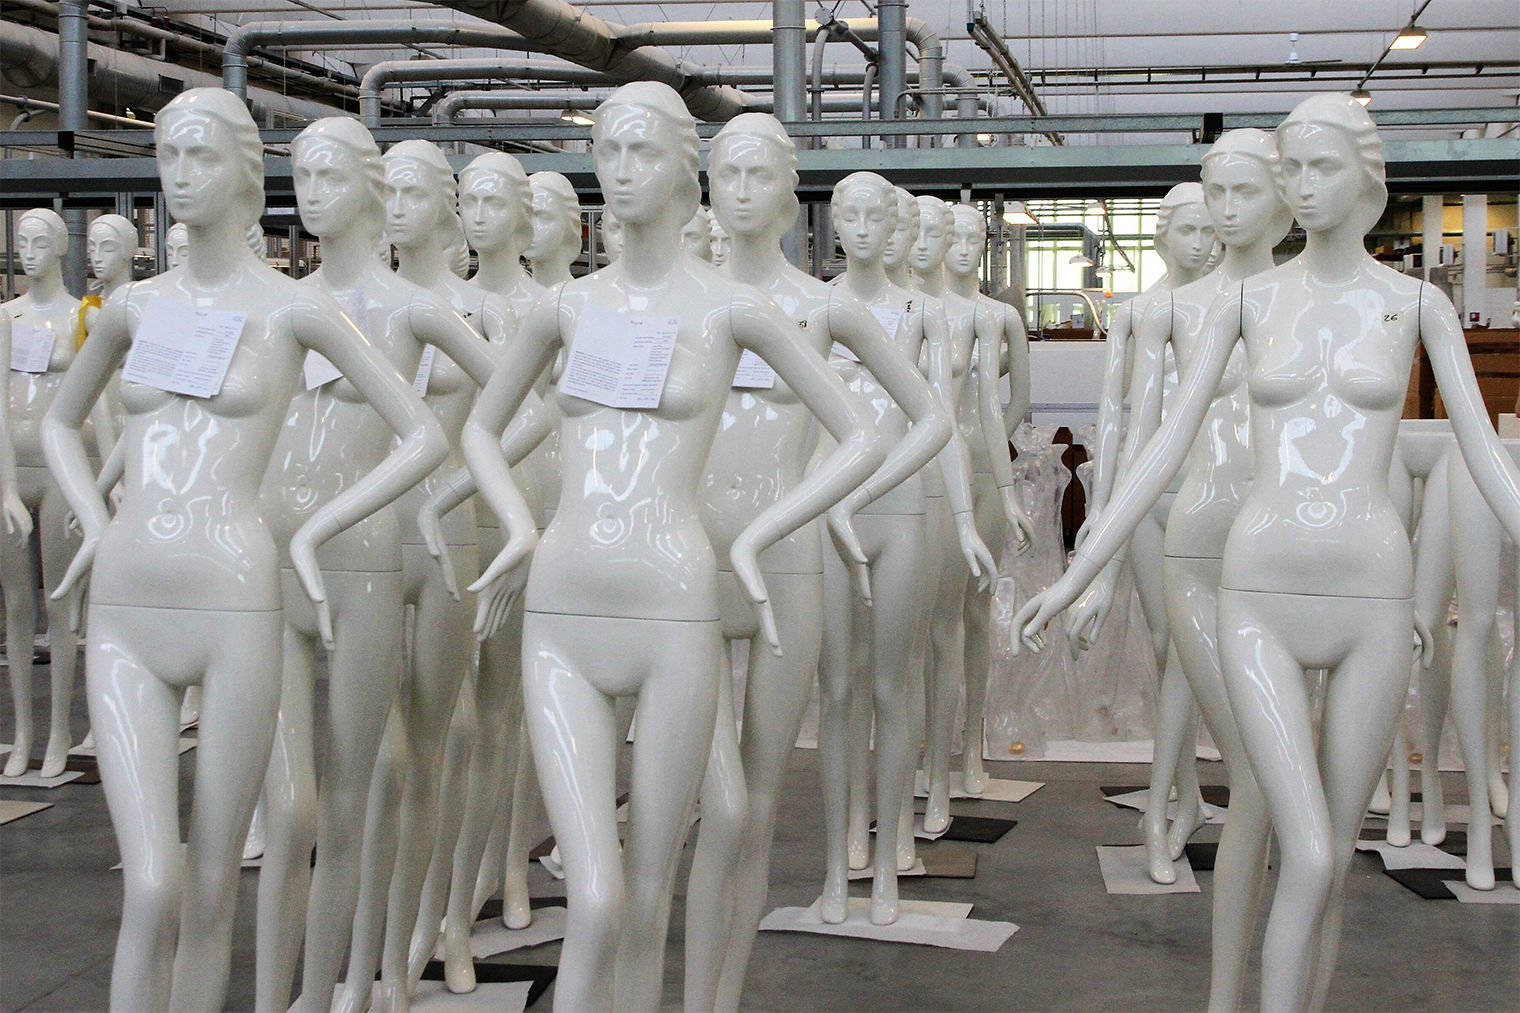 New High Quality Full Body Mannequin Fashion Mannequin Factory